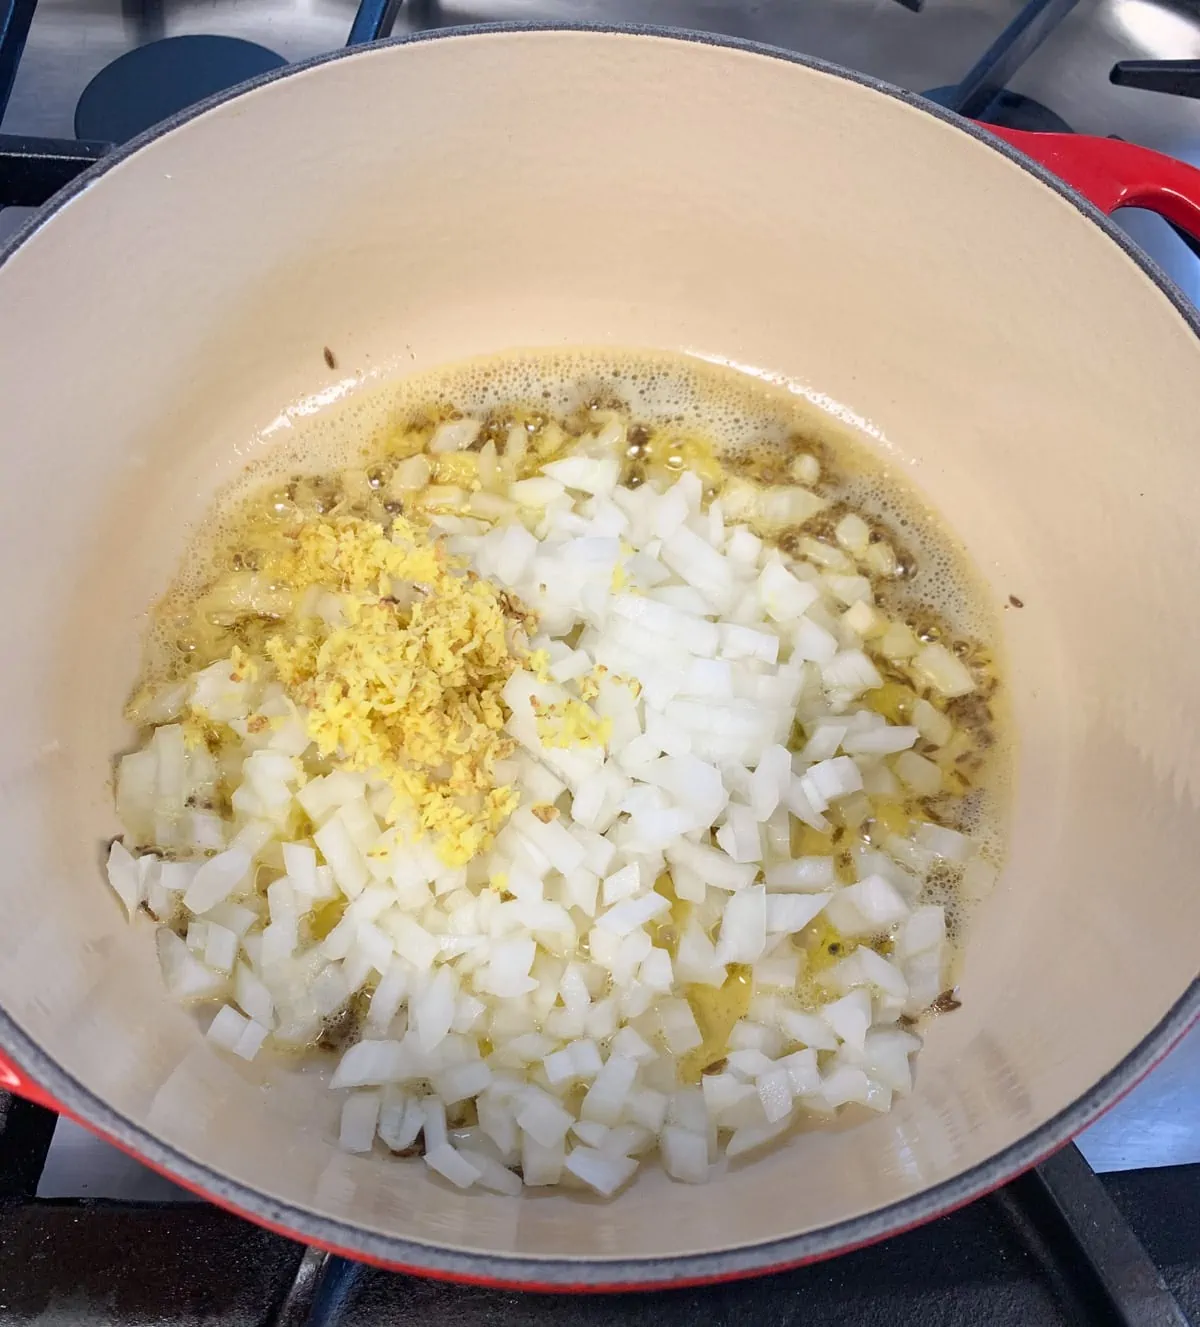 Saute onion, green chili, ginger with cumin seeds in ghee